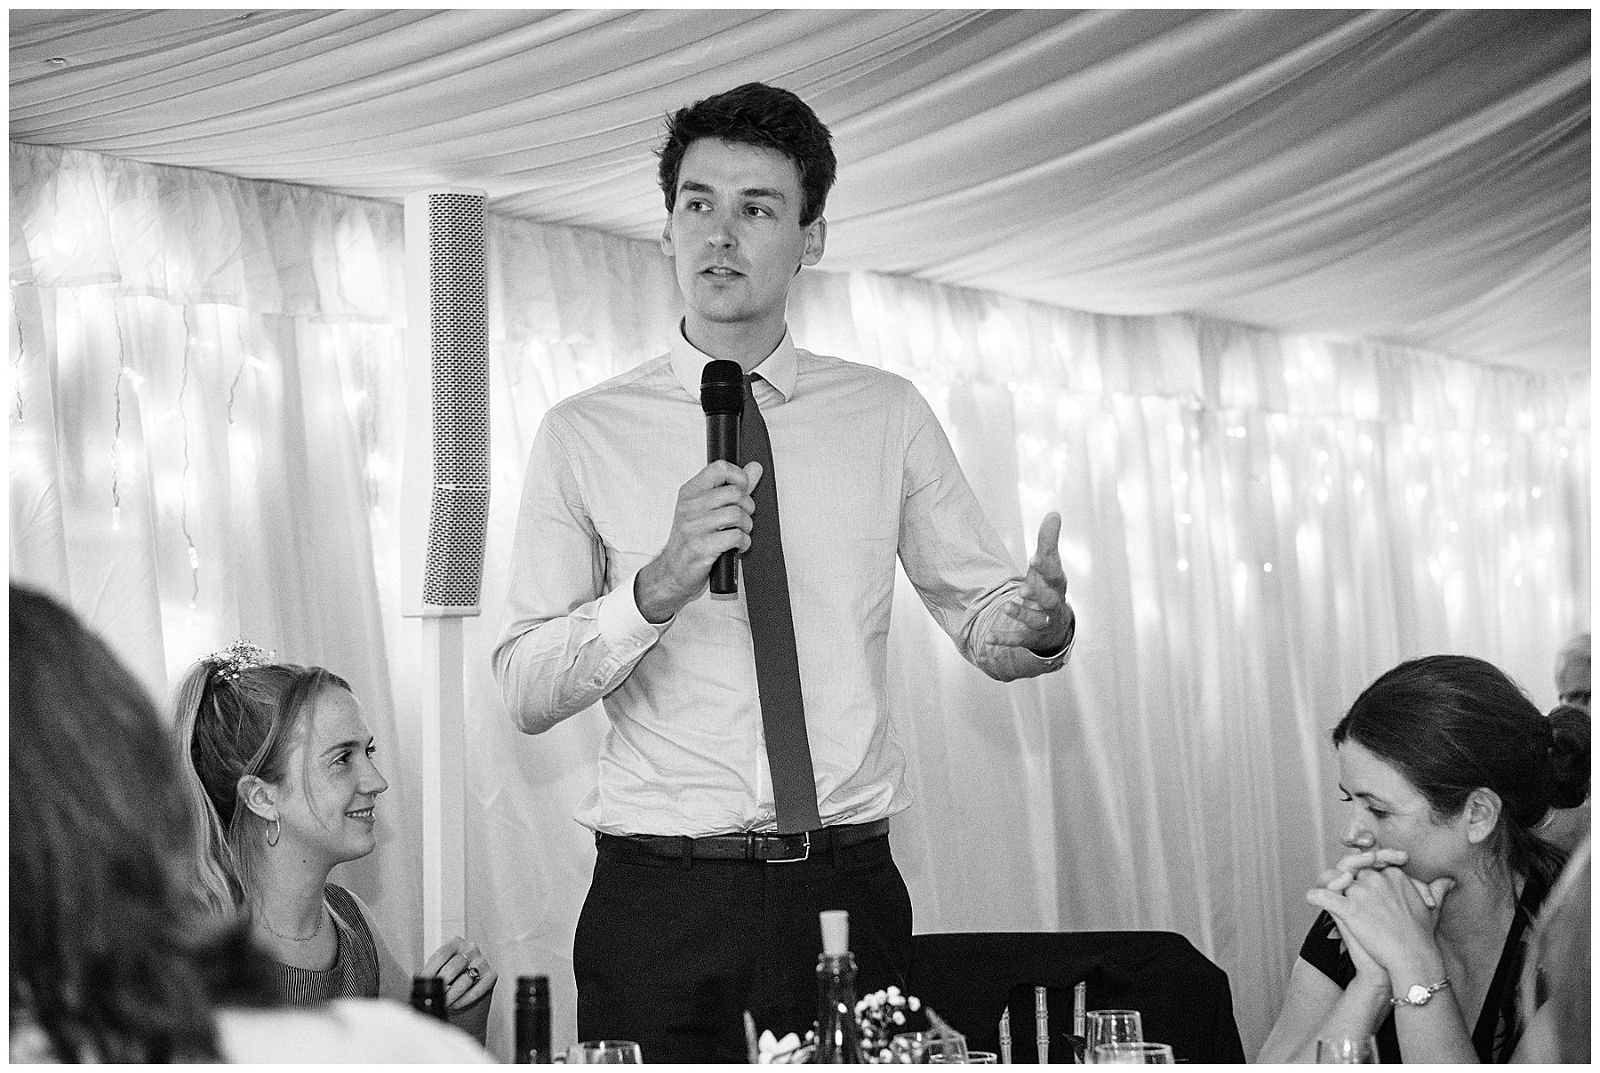 Time for the grooms son to take centre stage as best man to a rousing reception at Goldstone Hall in Shropshire by Documentary Wedding Photographer Stuart James